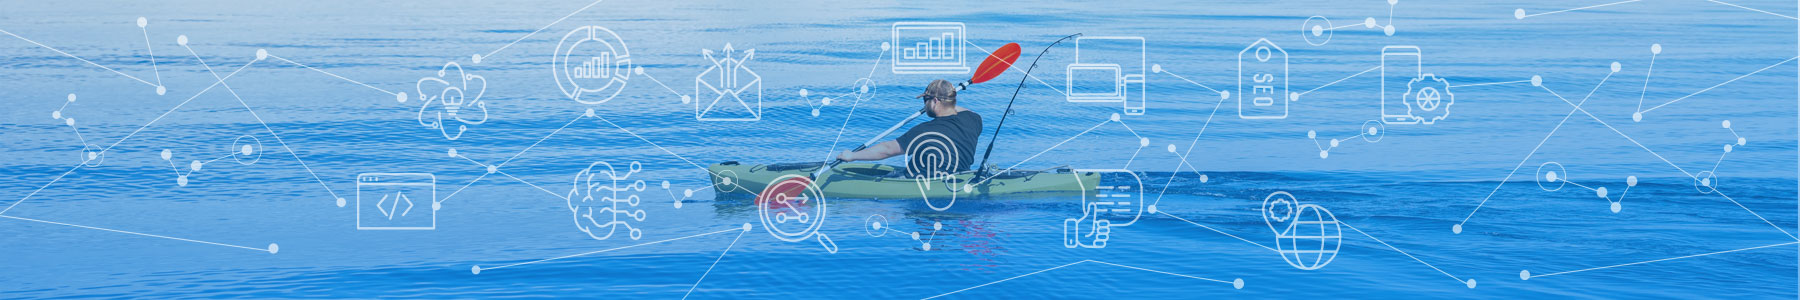 Digital marketing for fishing and paddlesport brands